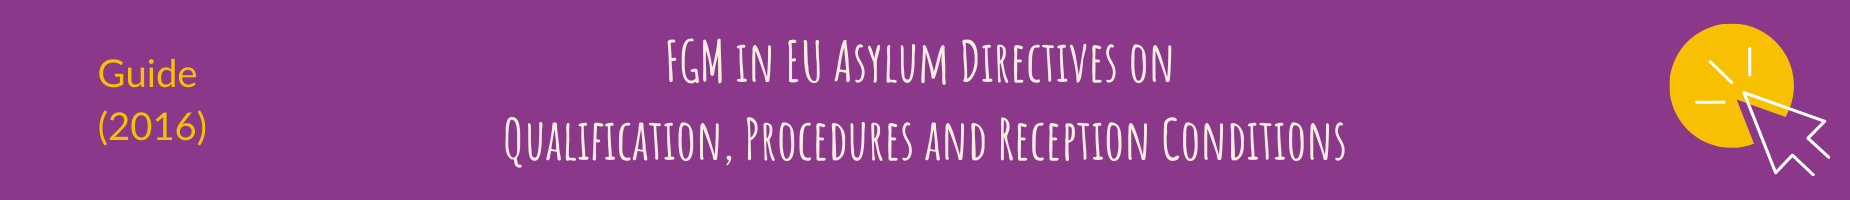 FGM in EU Asylum Directives on Qualification, Procedures and Reception Conditions - Guide (2016)